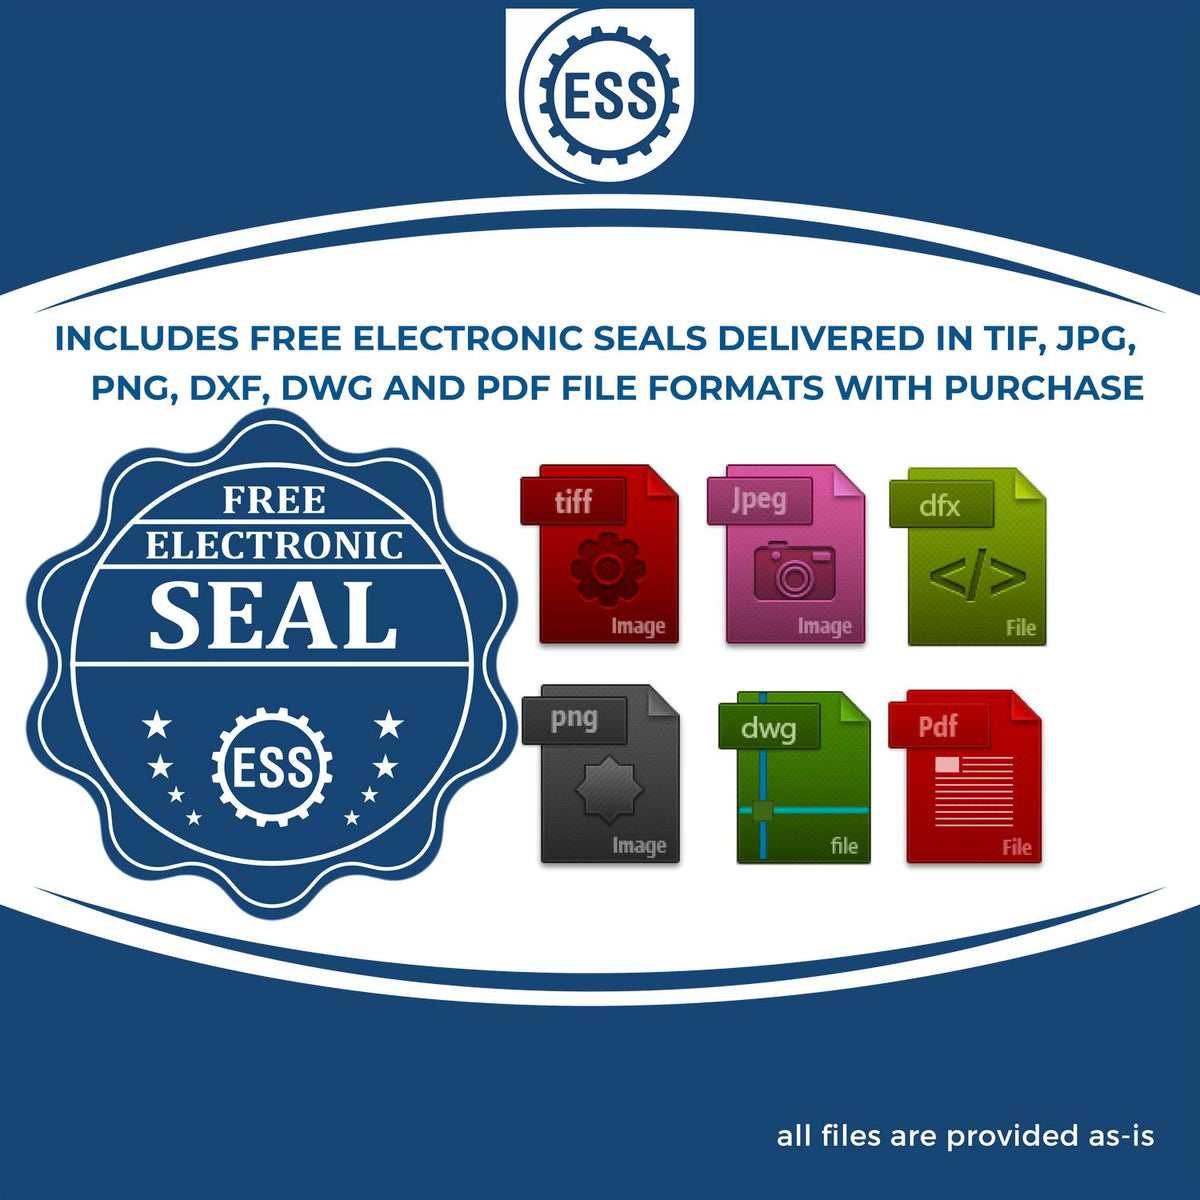 An infographic for the free electronic seal for the Gift Wyoming Architect Seal illustrating the different file type icons such as DXF, DWG, TIF, JPG and PNG.